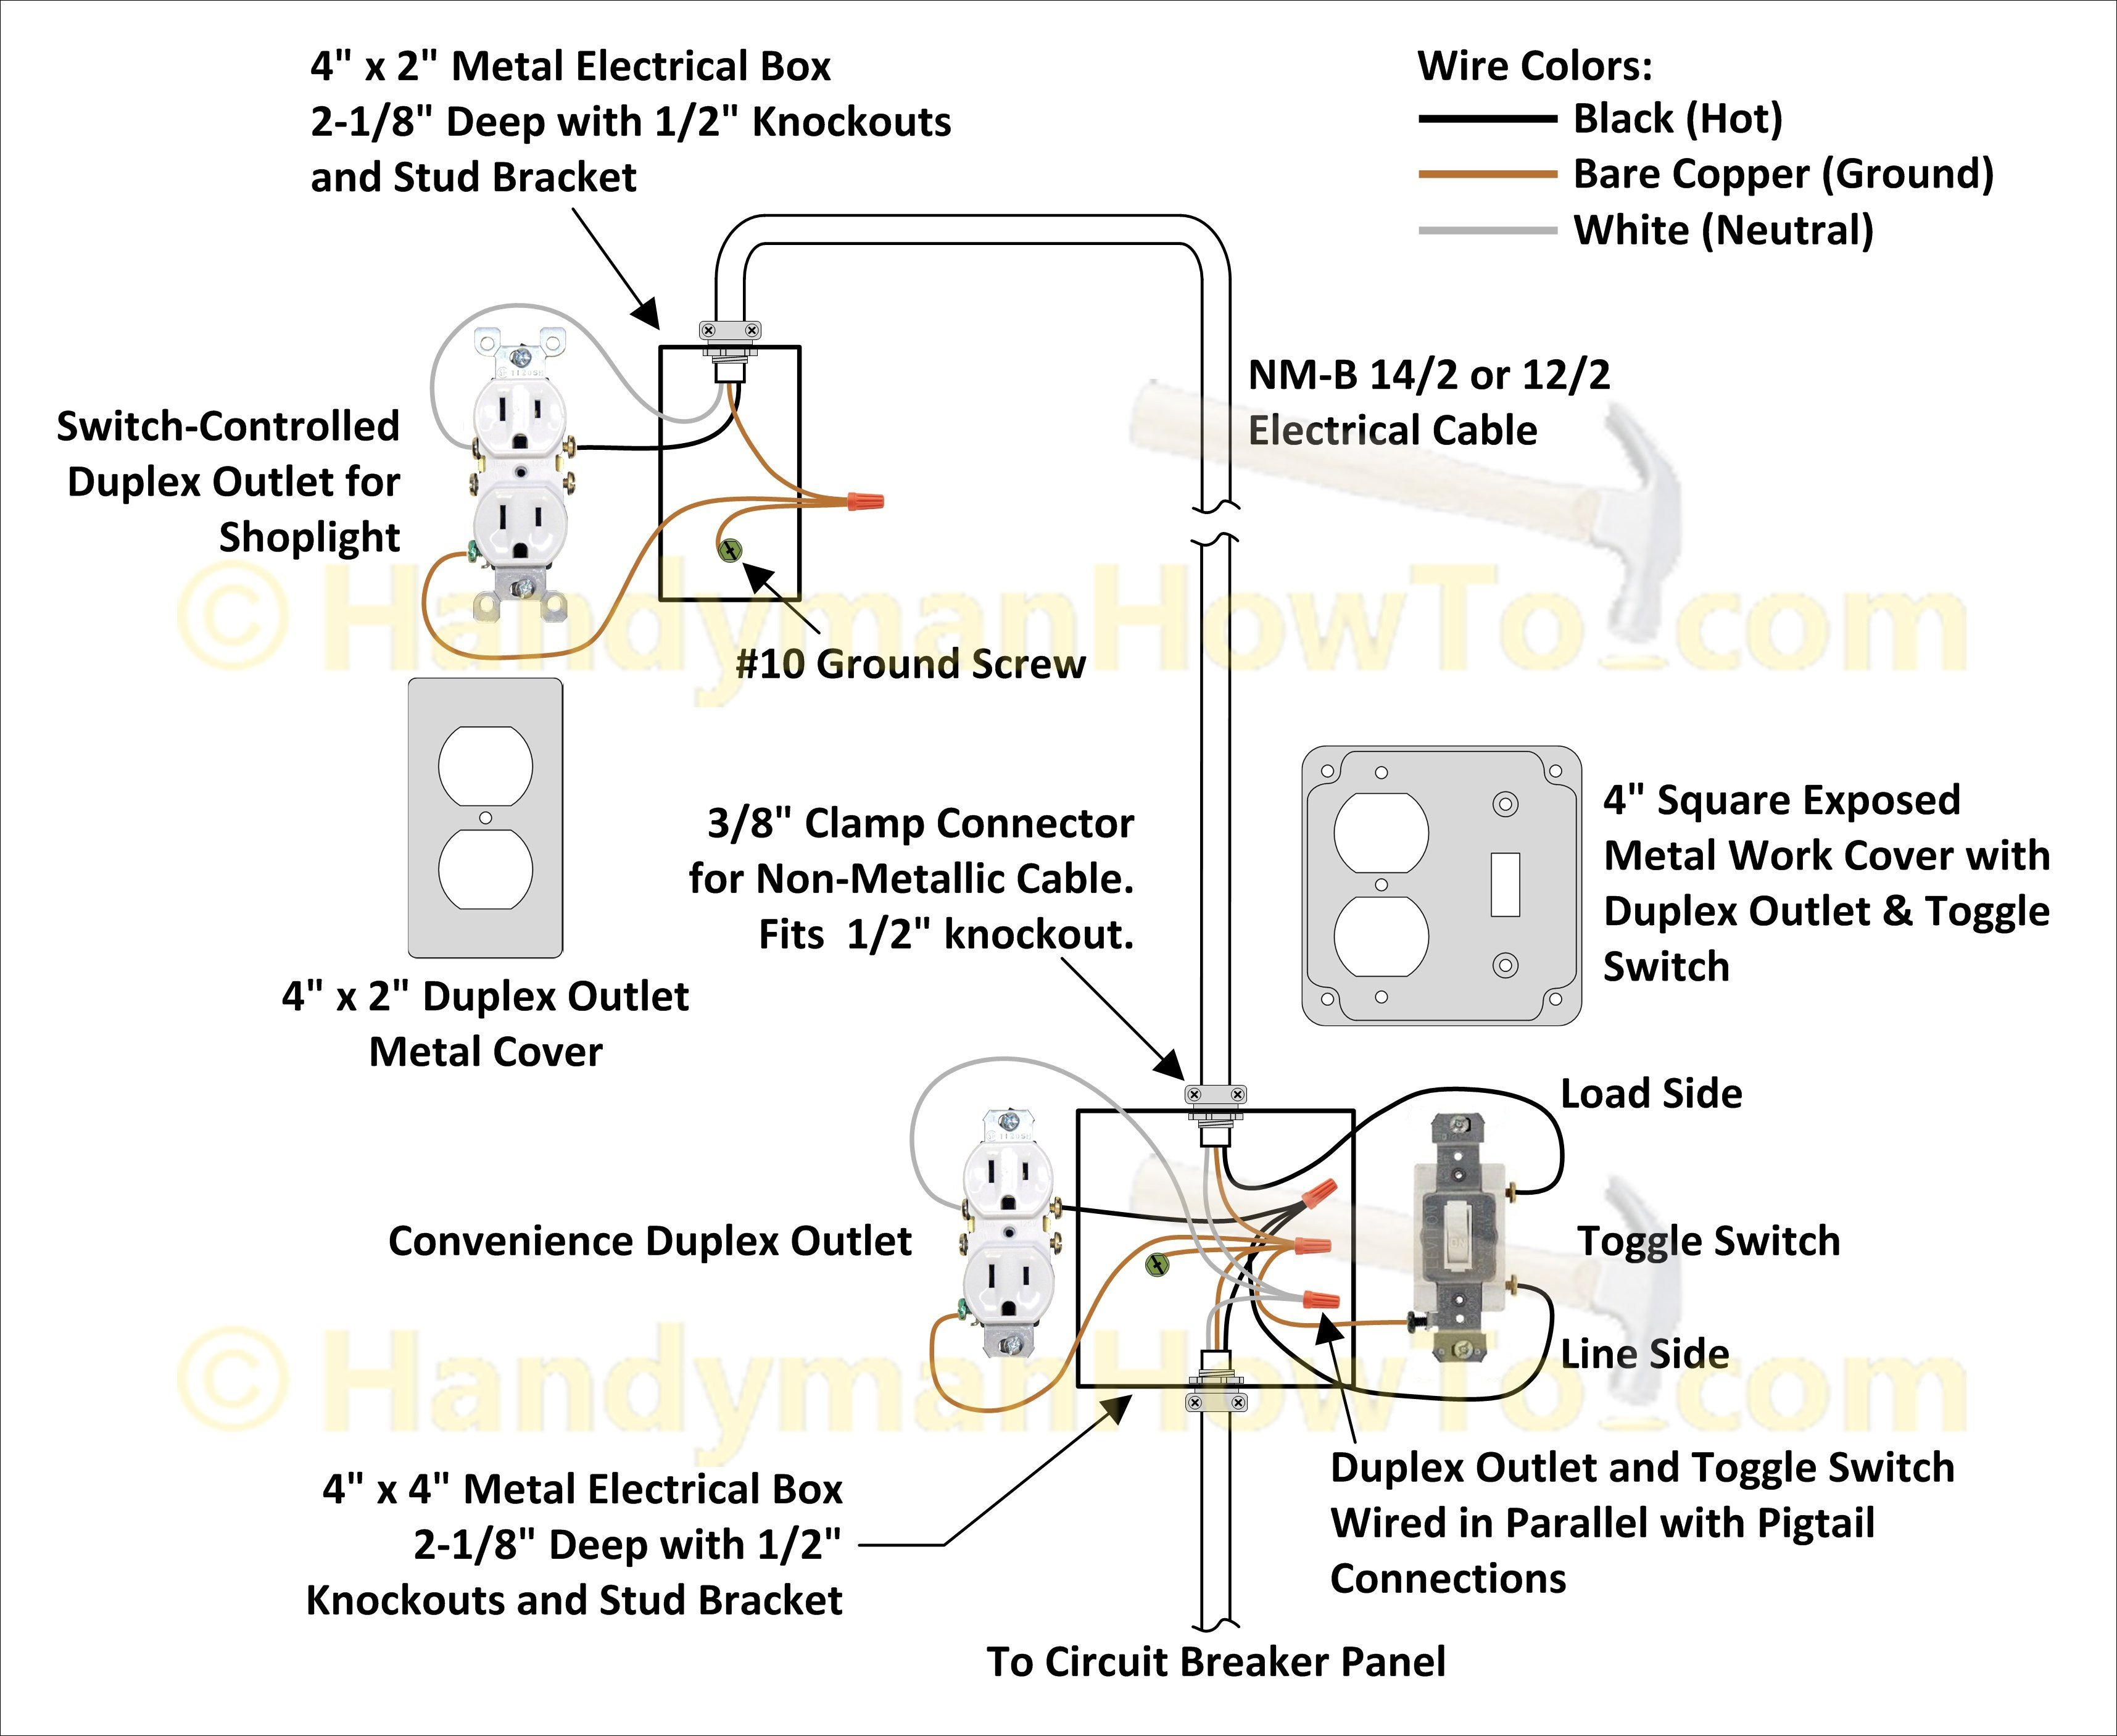 Wiring Diagram For 2 Sd Whole House Fan | Manual E-Books - 2 Speed Whole House Fan Switch Wiring Diagram